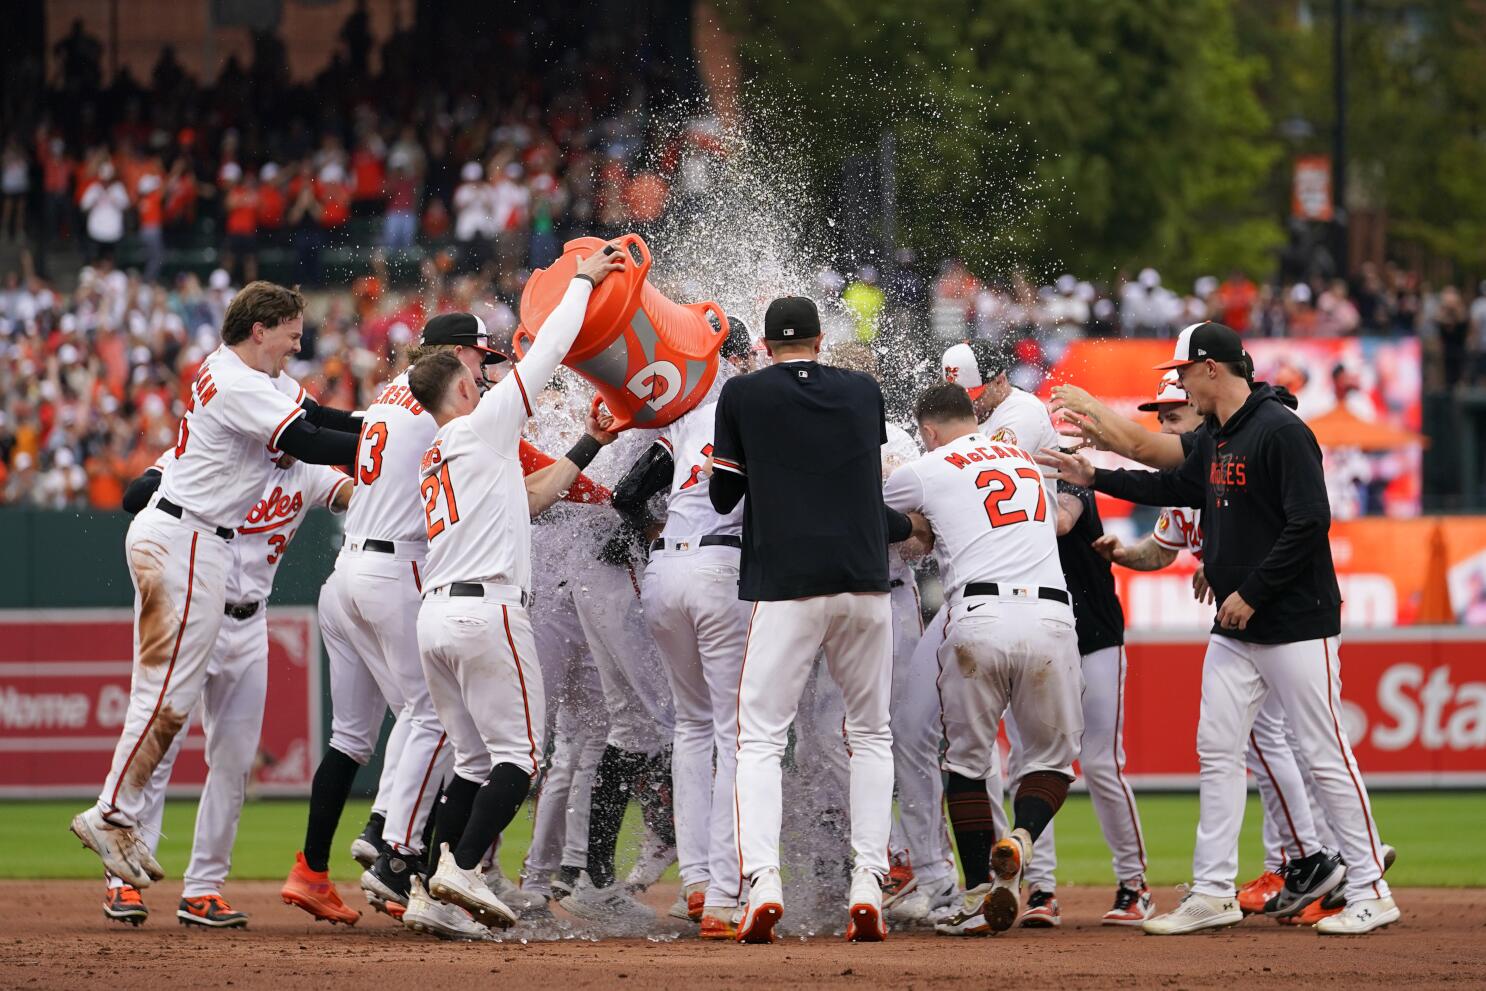 Then & Now: How Do the 2023 Orioles Compare to the '83 Championship Team?